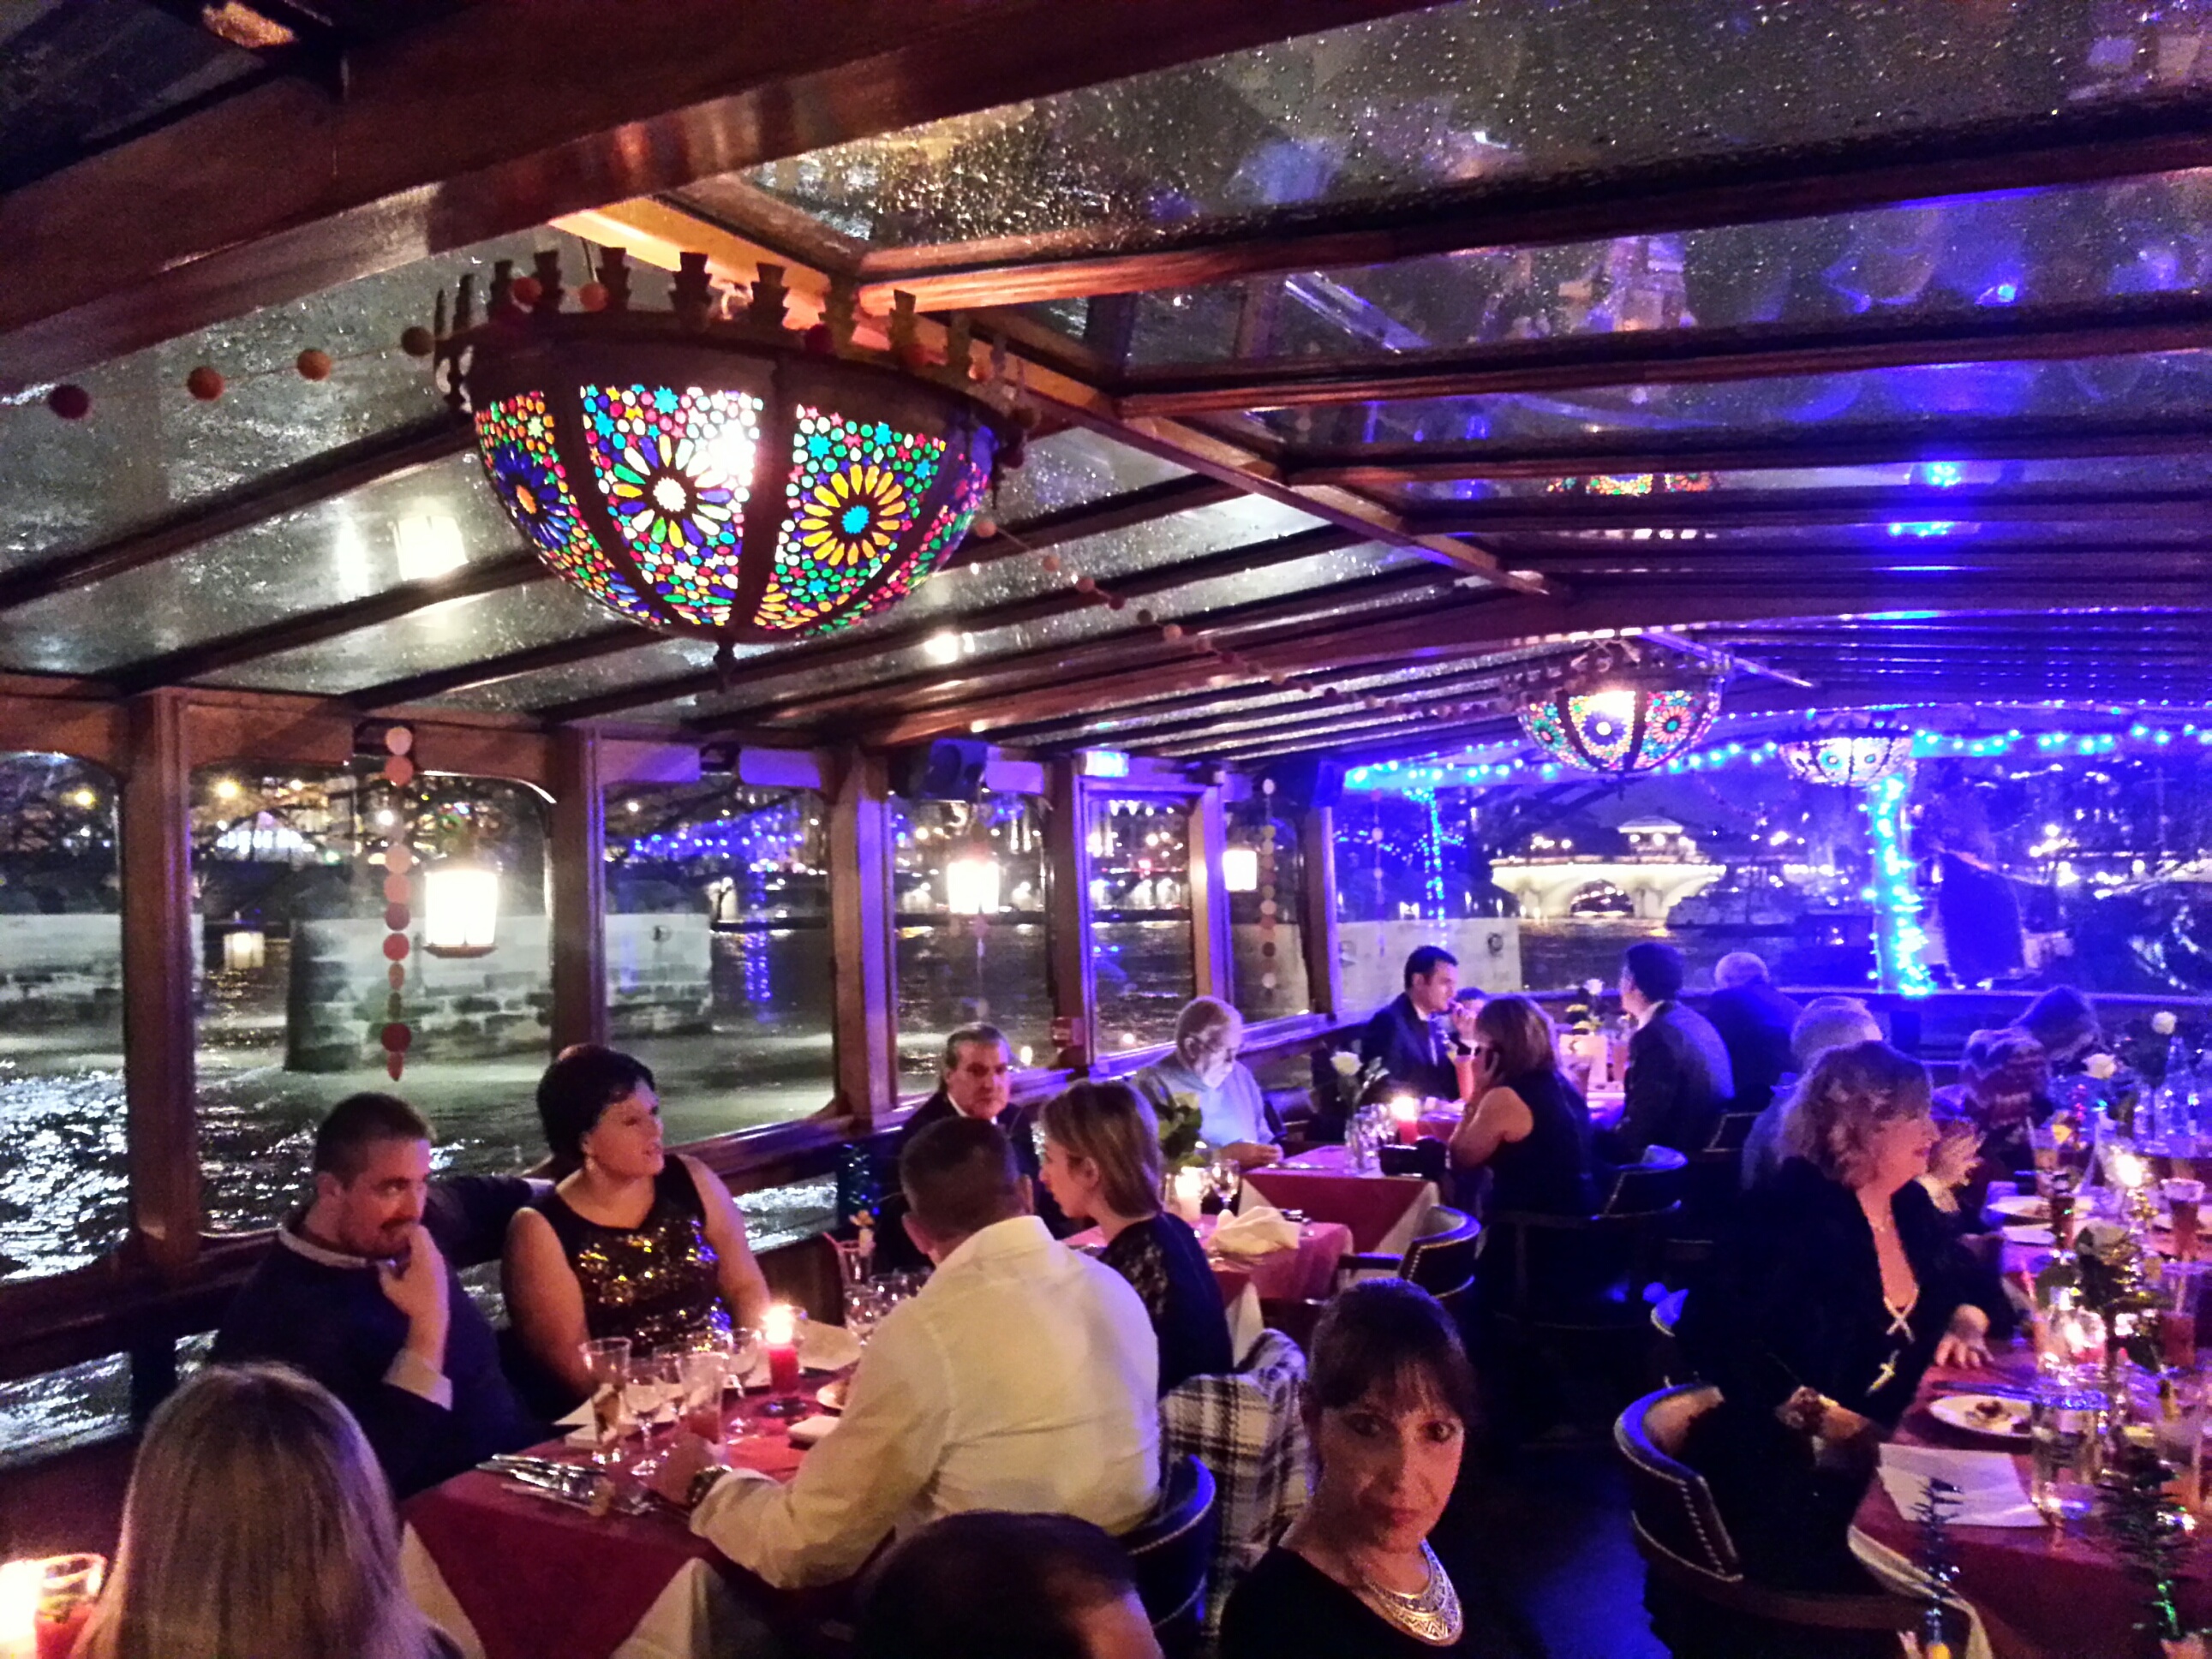 Le Calife - a glorious and and well lit dining expierence on the water